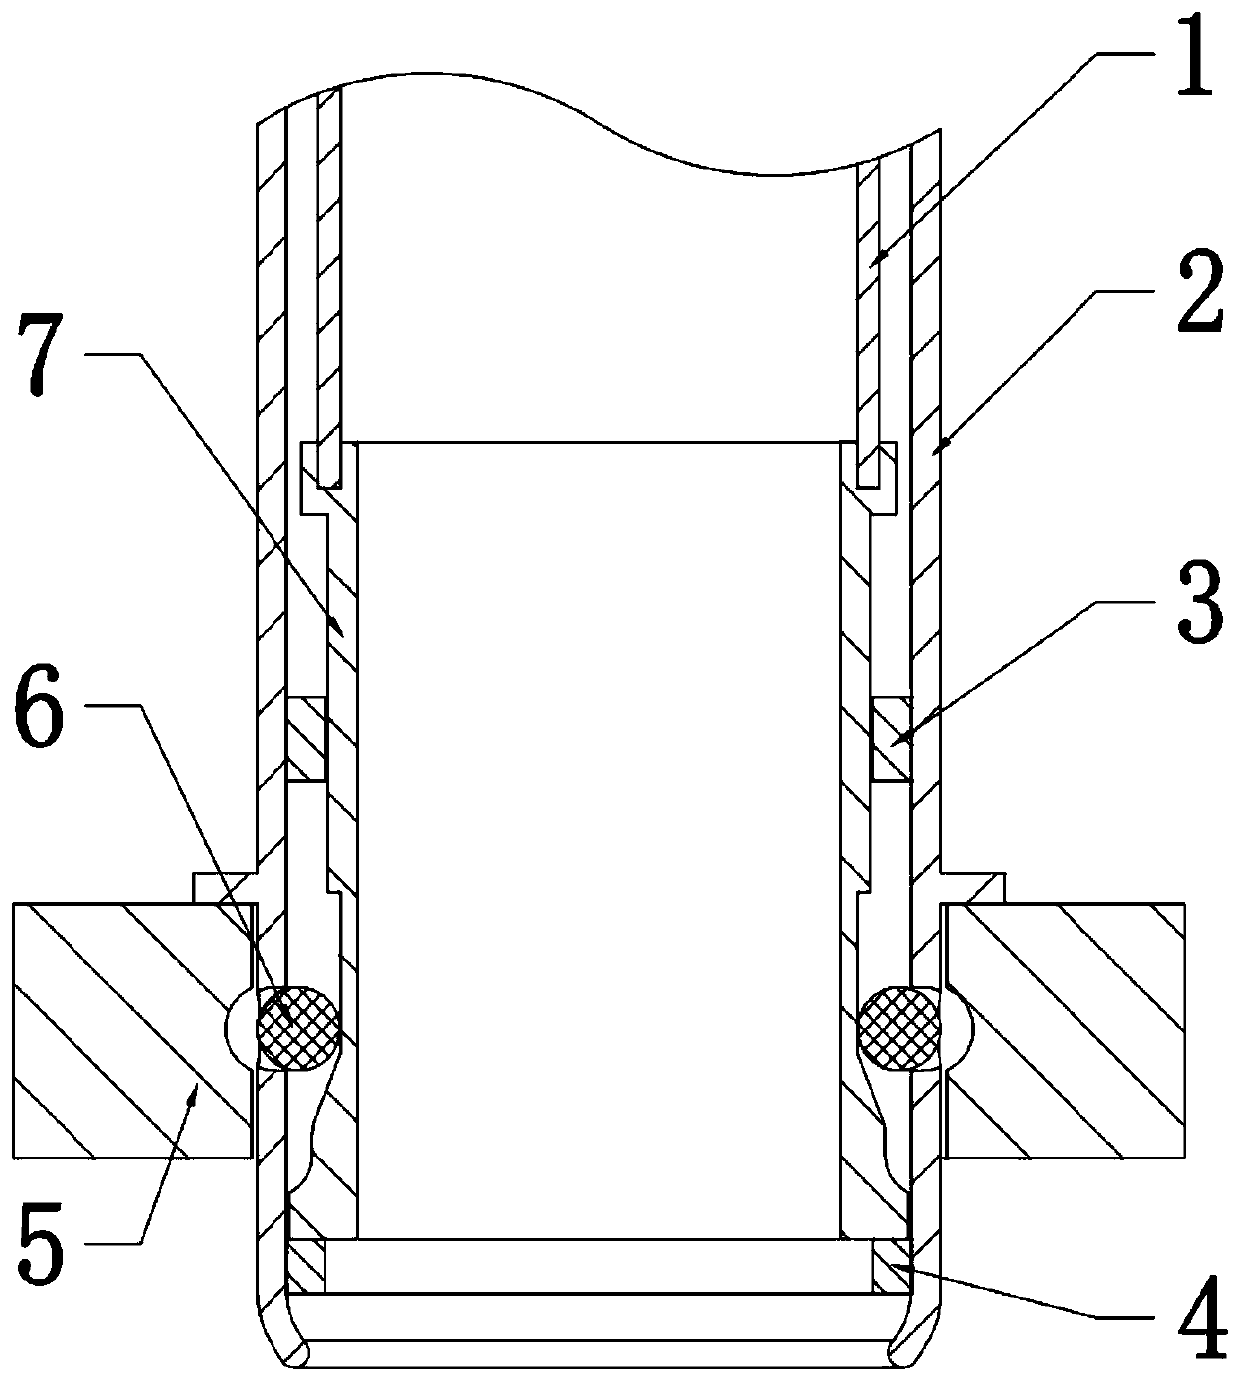 A locking, unlocking, grabbing and lifting device for lead-based reactor fuel assemblies